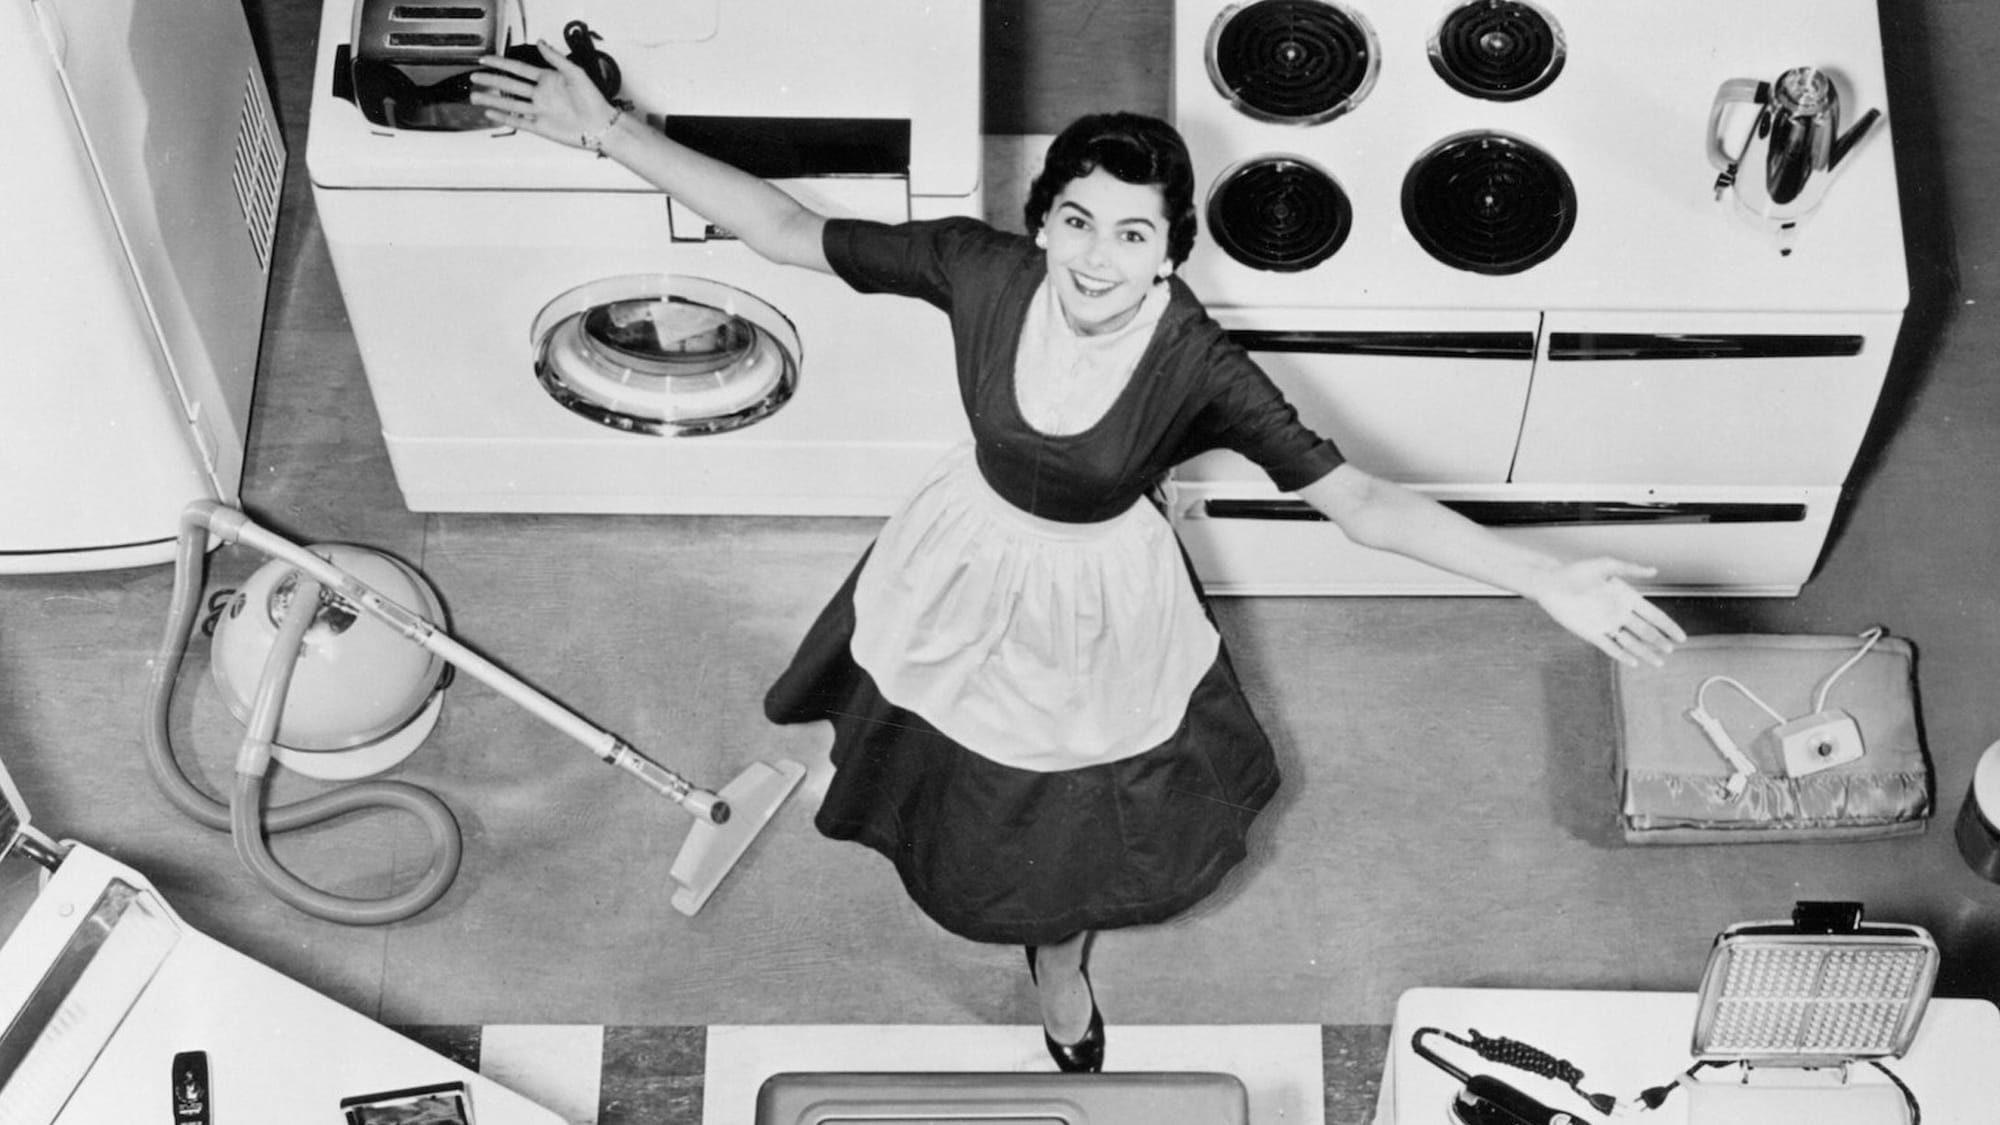 B/W image from the early 50's shows a woman in a black New Look dress and white apron in a spotless kitchen